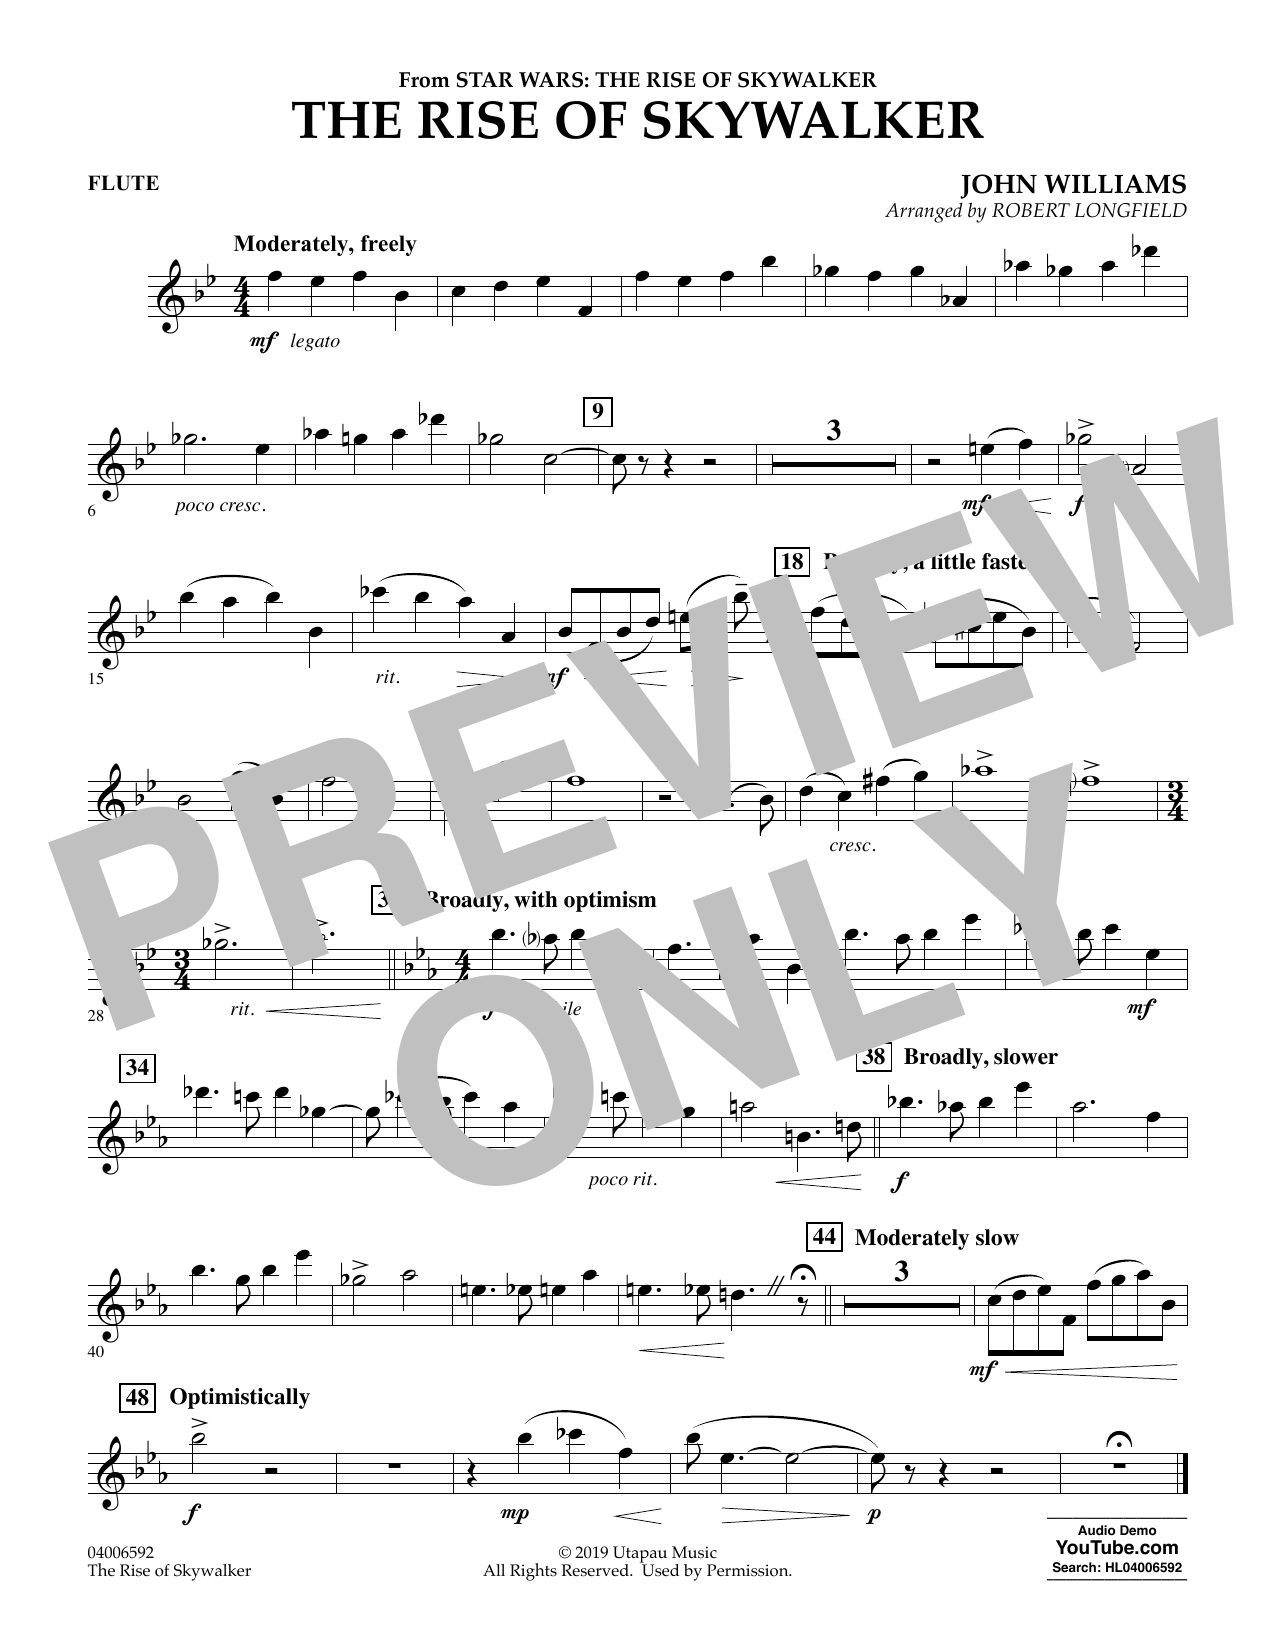 John Williams The Rise of Skywalker (from Star Wars: The Rise of Skywalker) - Flute sheet music preview music notes and score for Concert Band including 1 page(s)